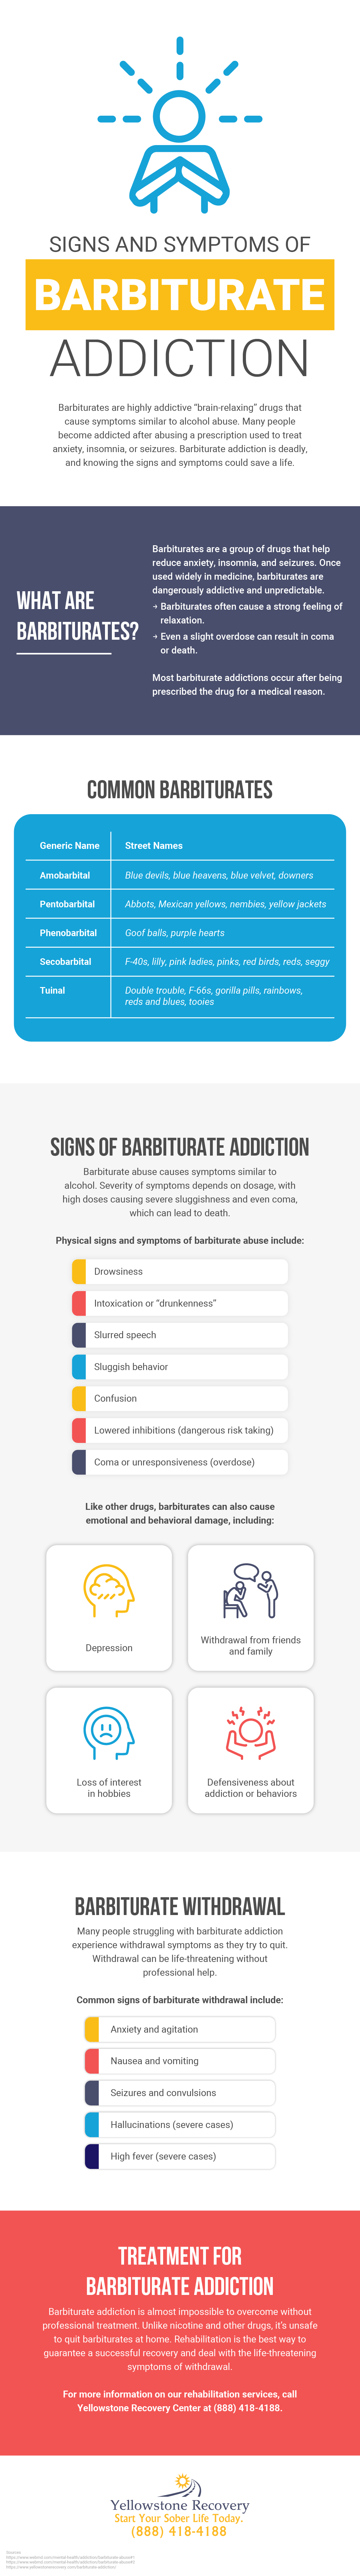 Signs and Symptoms of Barbiturate Addiction Infographic